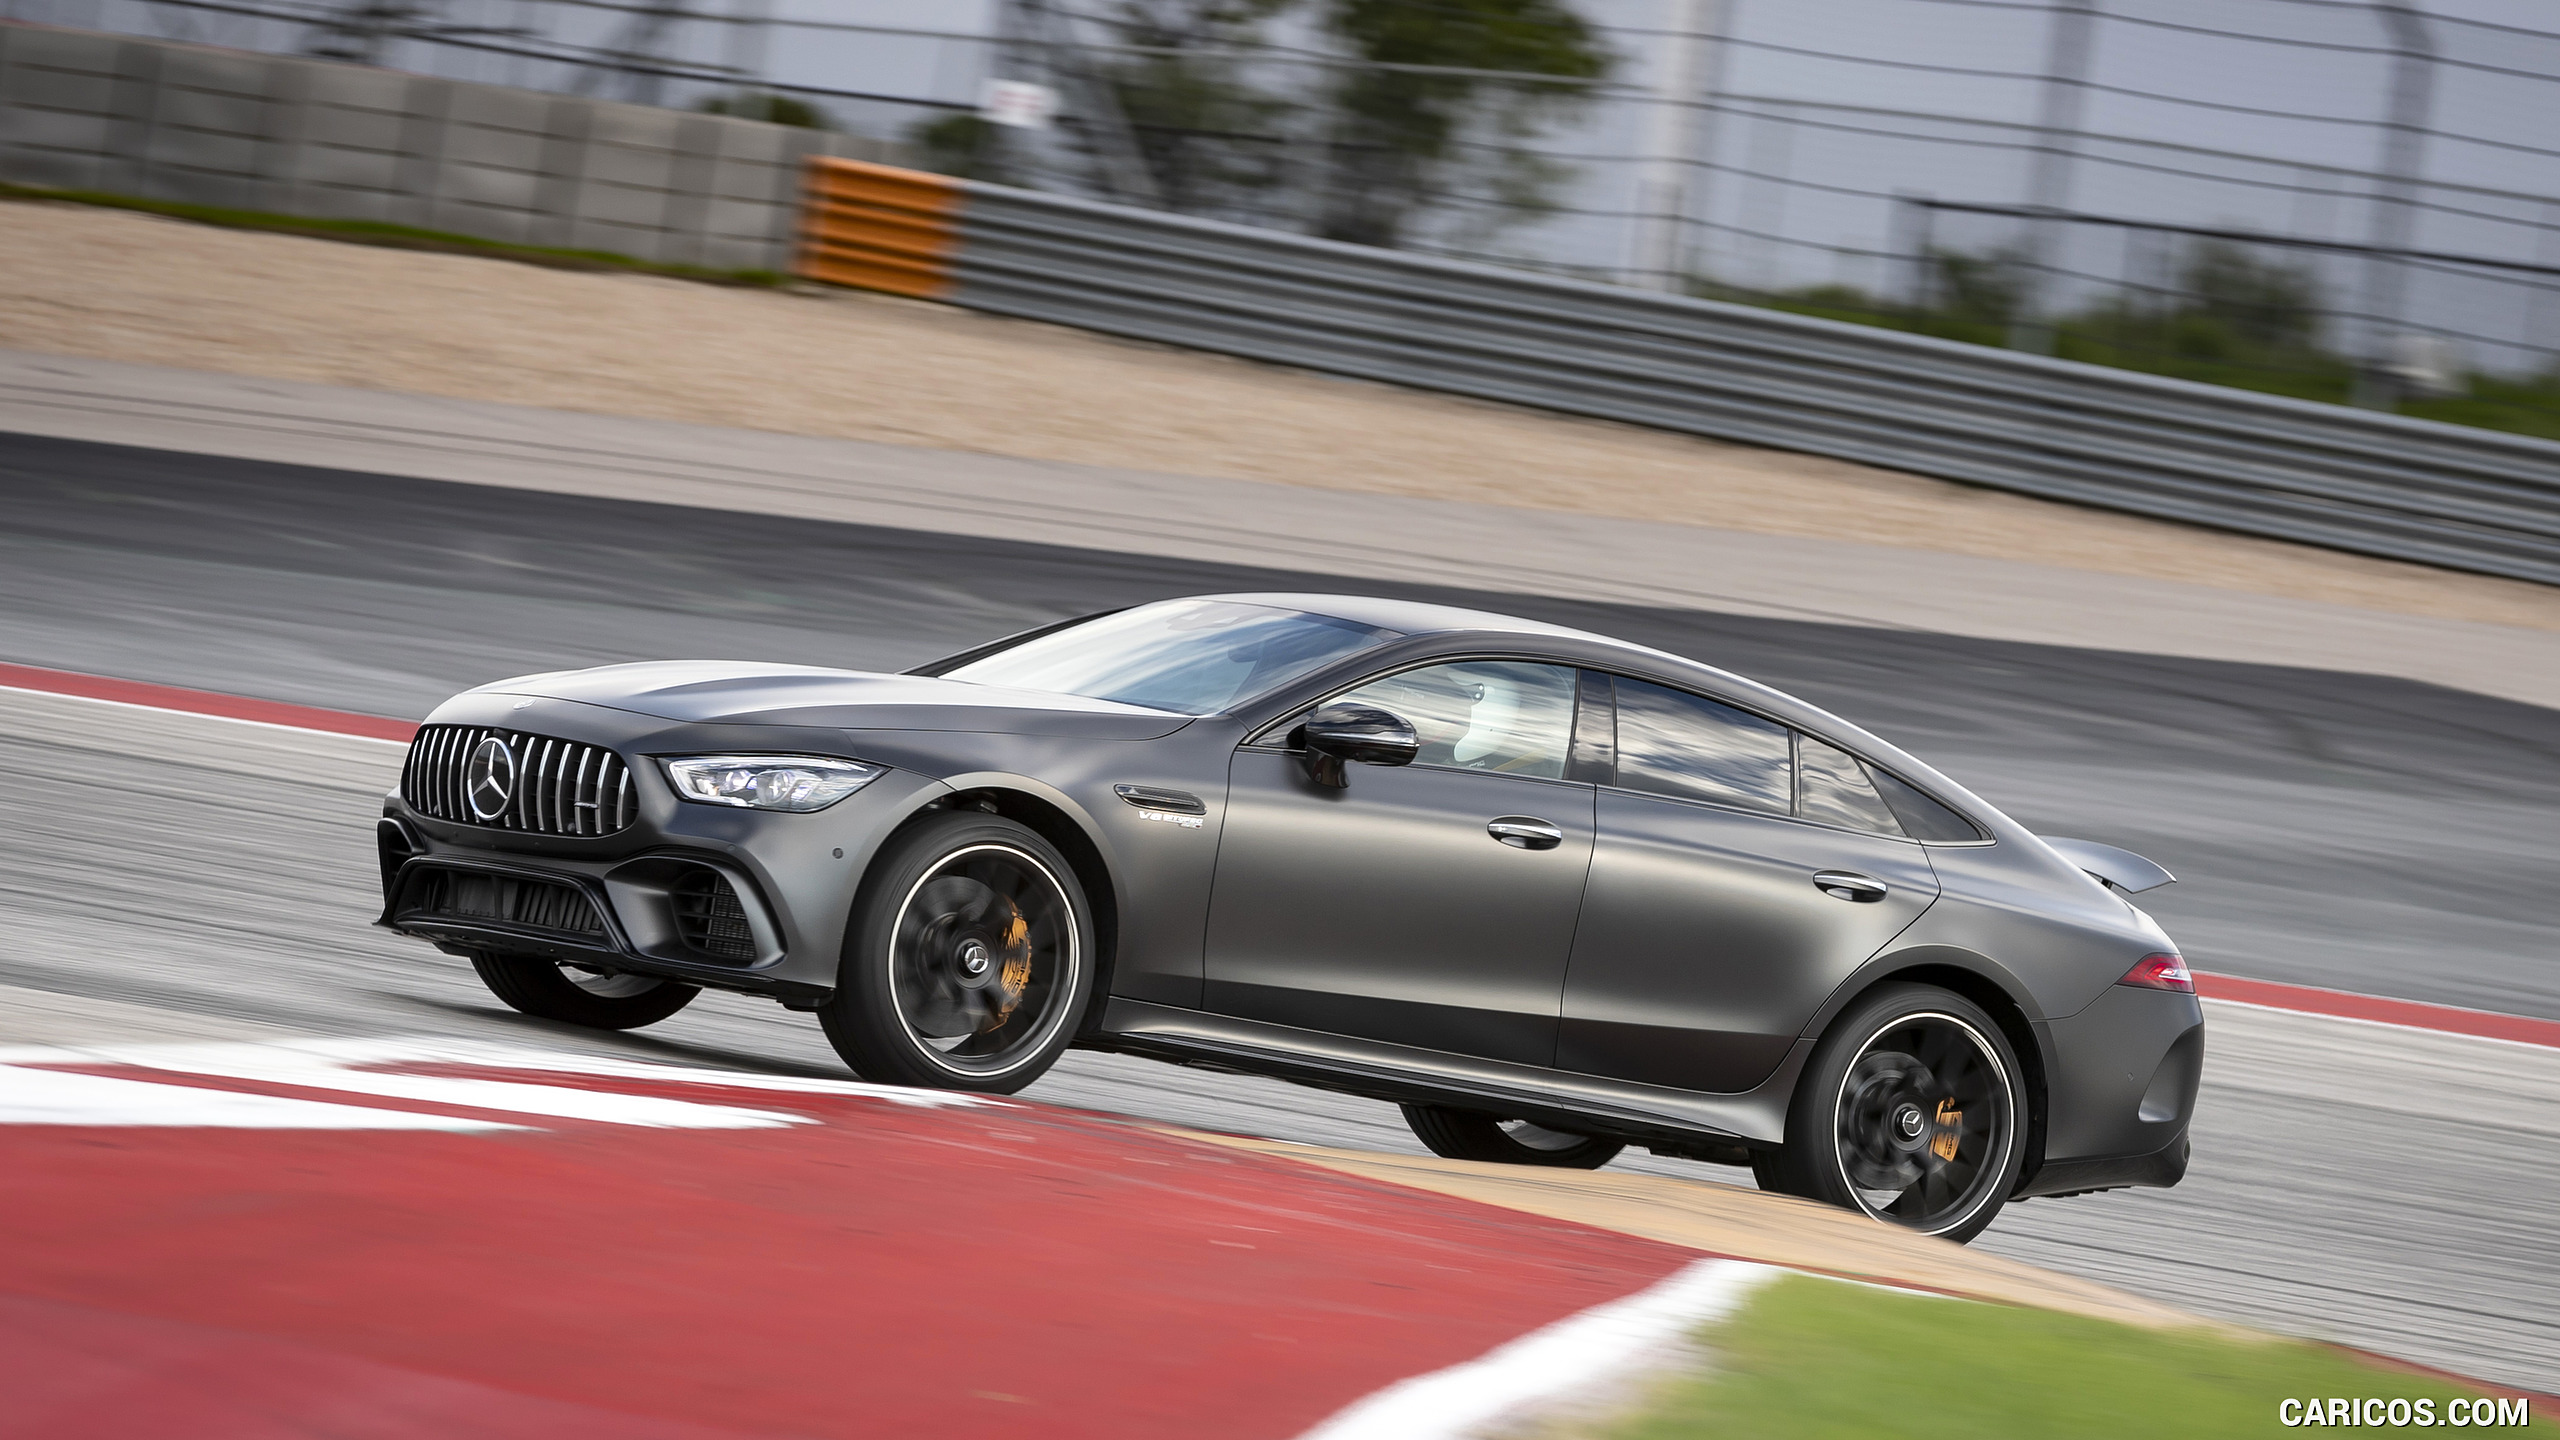 2019 Mercedes-AMG GT 63 S 4MATIC+ 4-Door Coupe - Side, #185 of 427